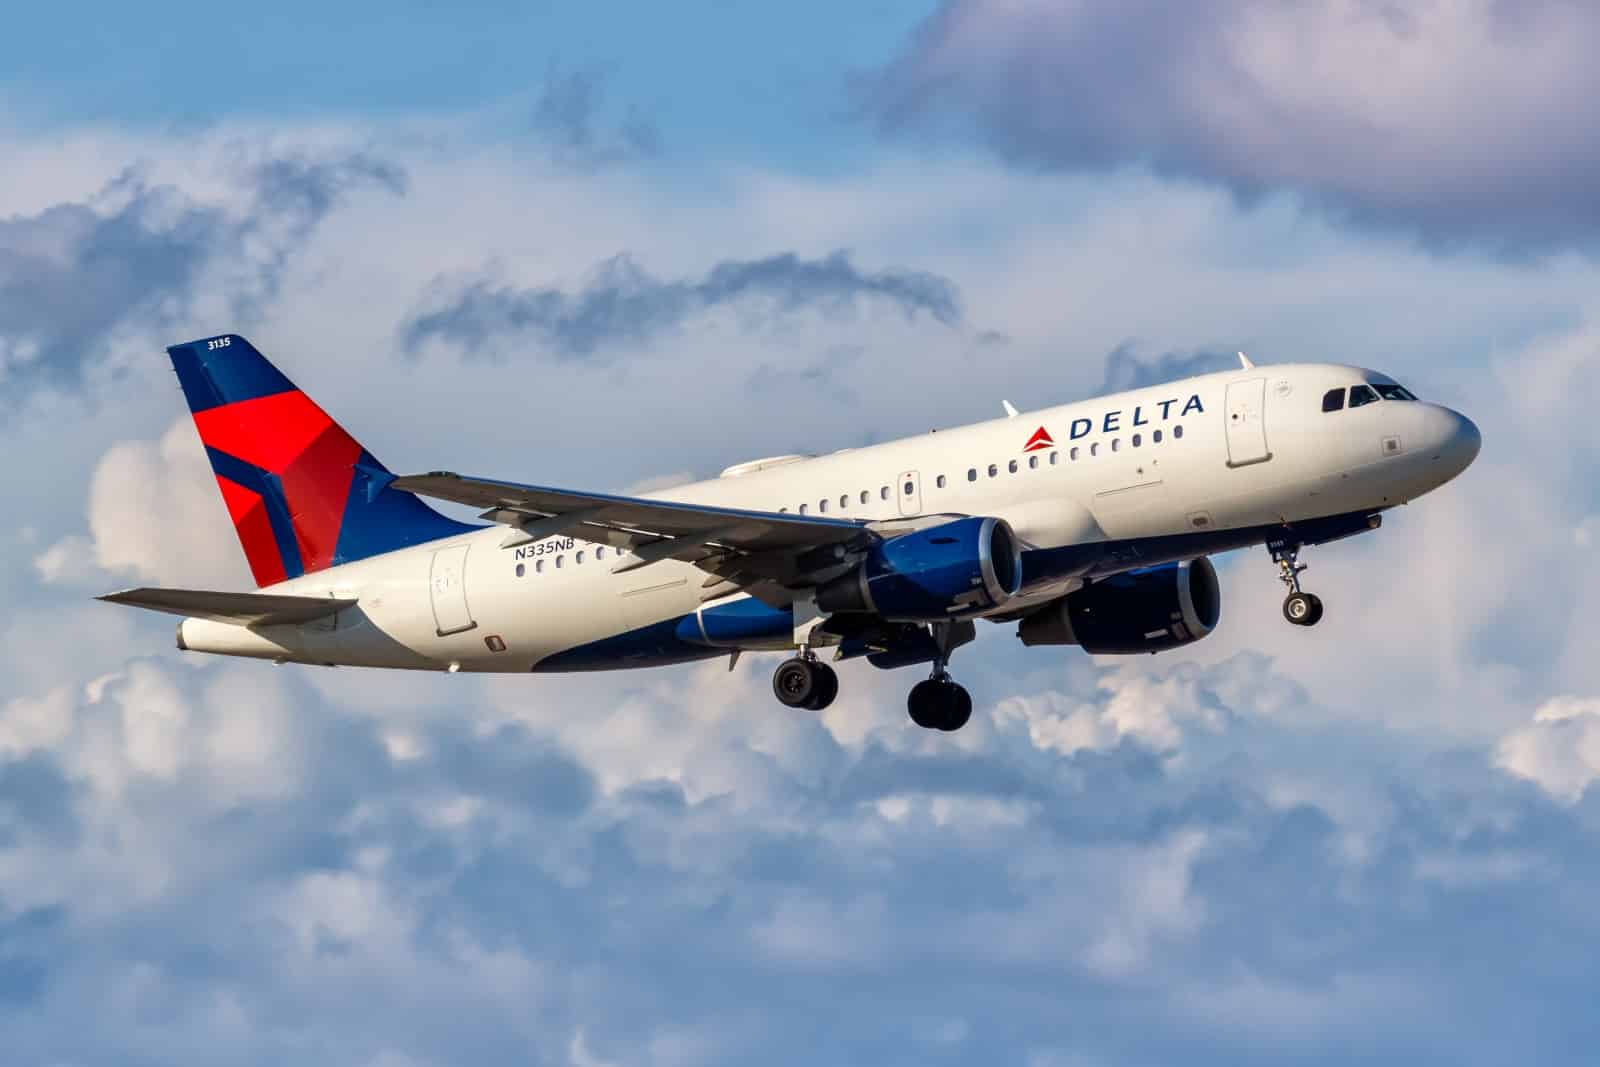 <p><span>Delta SkyMiles is an airline loyalty program that rewards you with miles for every flight, which can be redeemed for free flights, seat upgrades, and more. One of the program’s strengths is the absence of blackout dates for award travel, providing greater flexibility for using your miles. </span></p> <p><span>As you accumulate more miles, you can achieve elite status, which offers additional perks like priority boarding, complimentary upgrades, and waived baggage fees. Delta also has partnerships with hotels, car rental agencies, and retailers, allowing you to earn miles on everyday purchases, not just flights. </span></p> <p><b>Insider’s Tip: </b><span>Use the Delta SkyMiles shopping portal to earn miles on everyday purchases.</span></p>